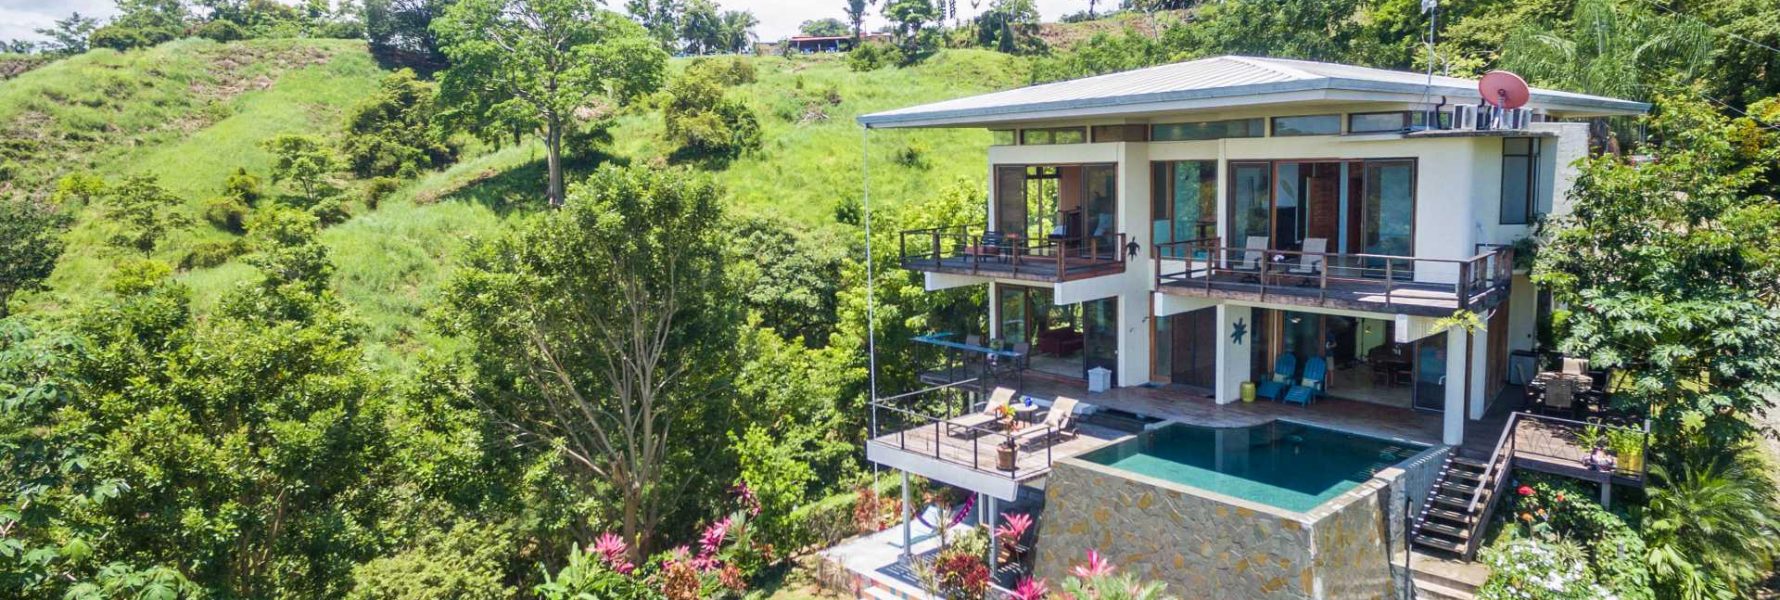 A beautiful property deep in the heart of Manuel Antonio. You will have perfect views of the Pacific coastline and Manuel Antonio National Park.